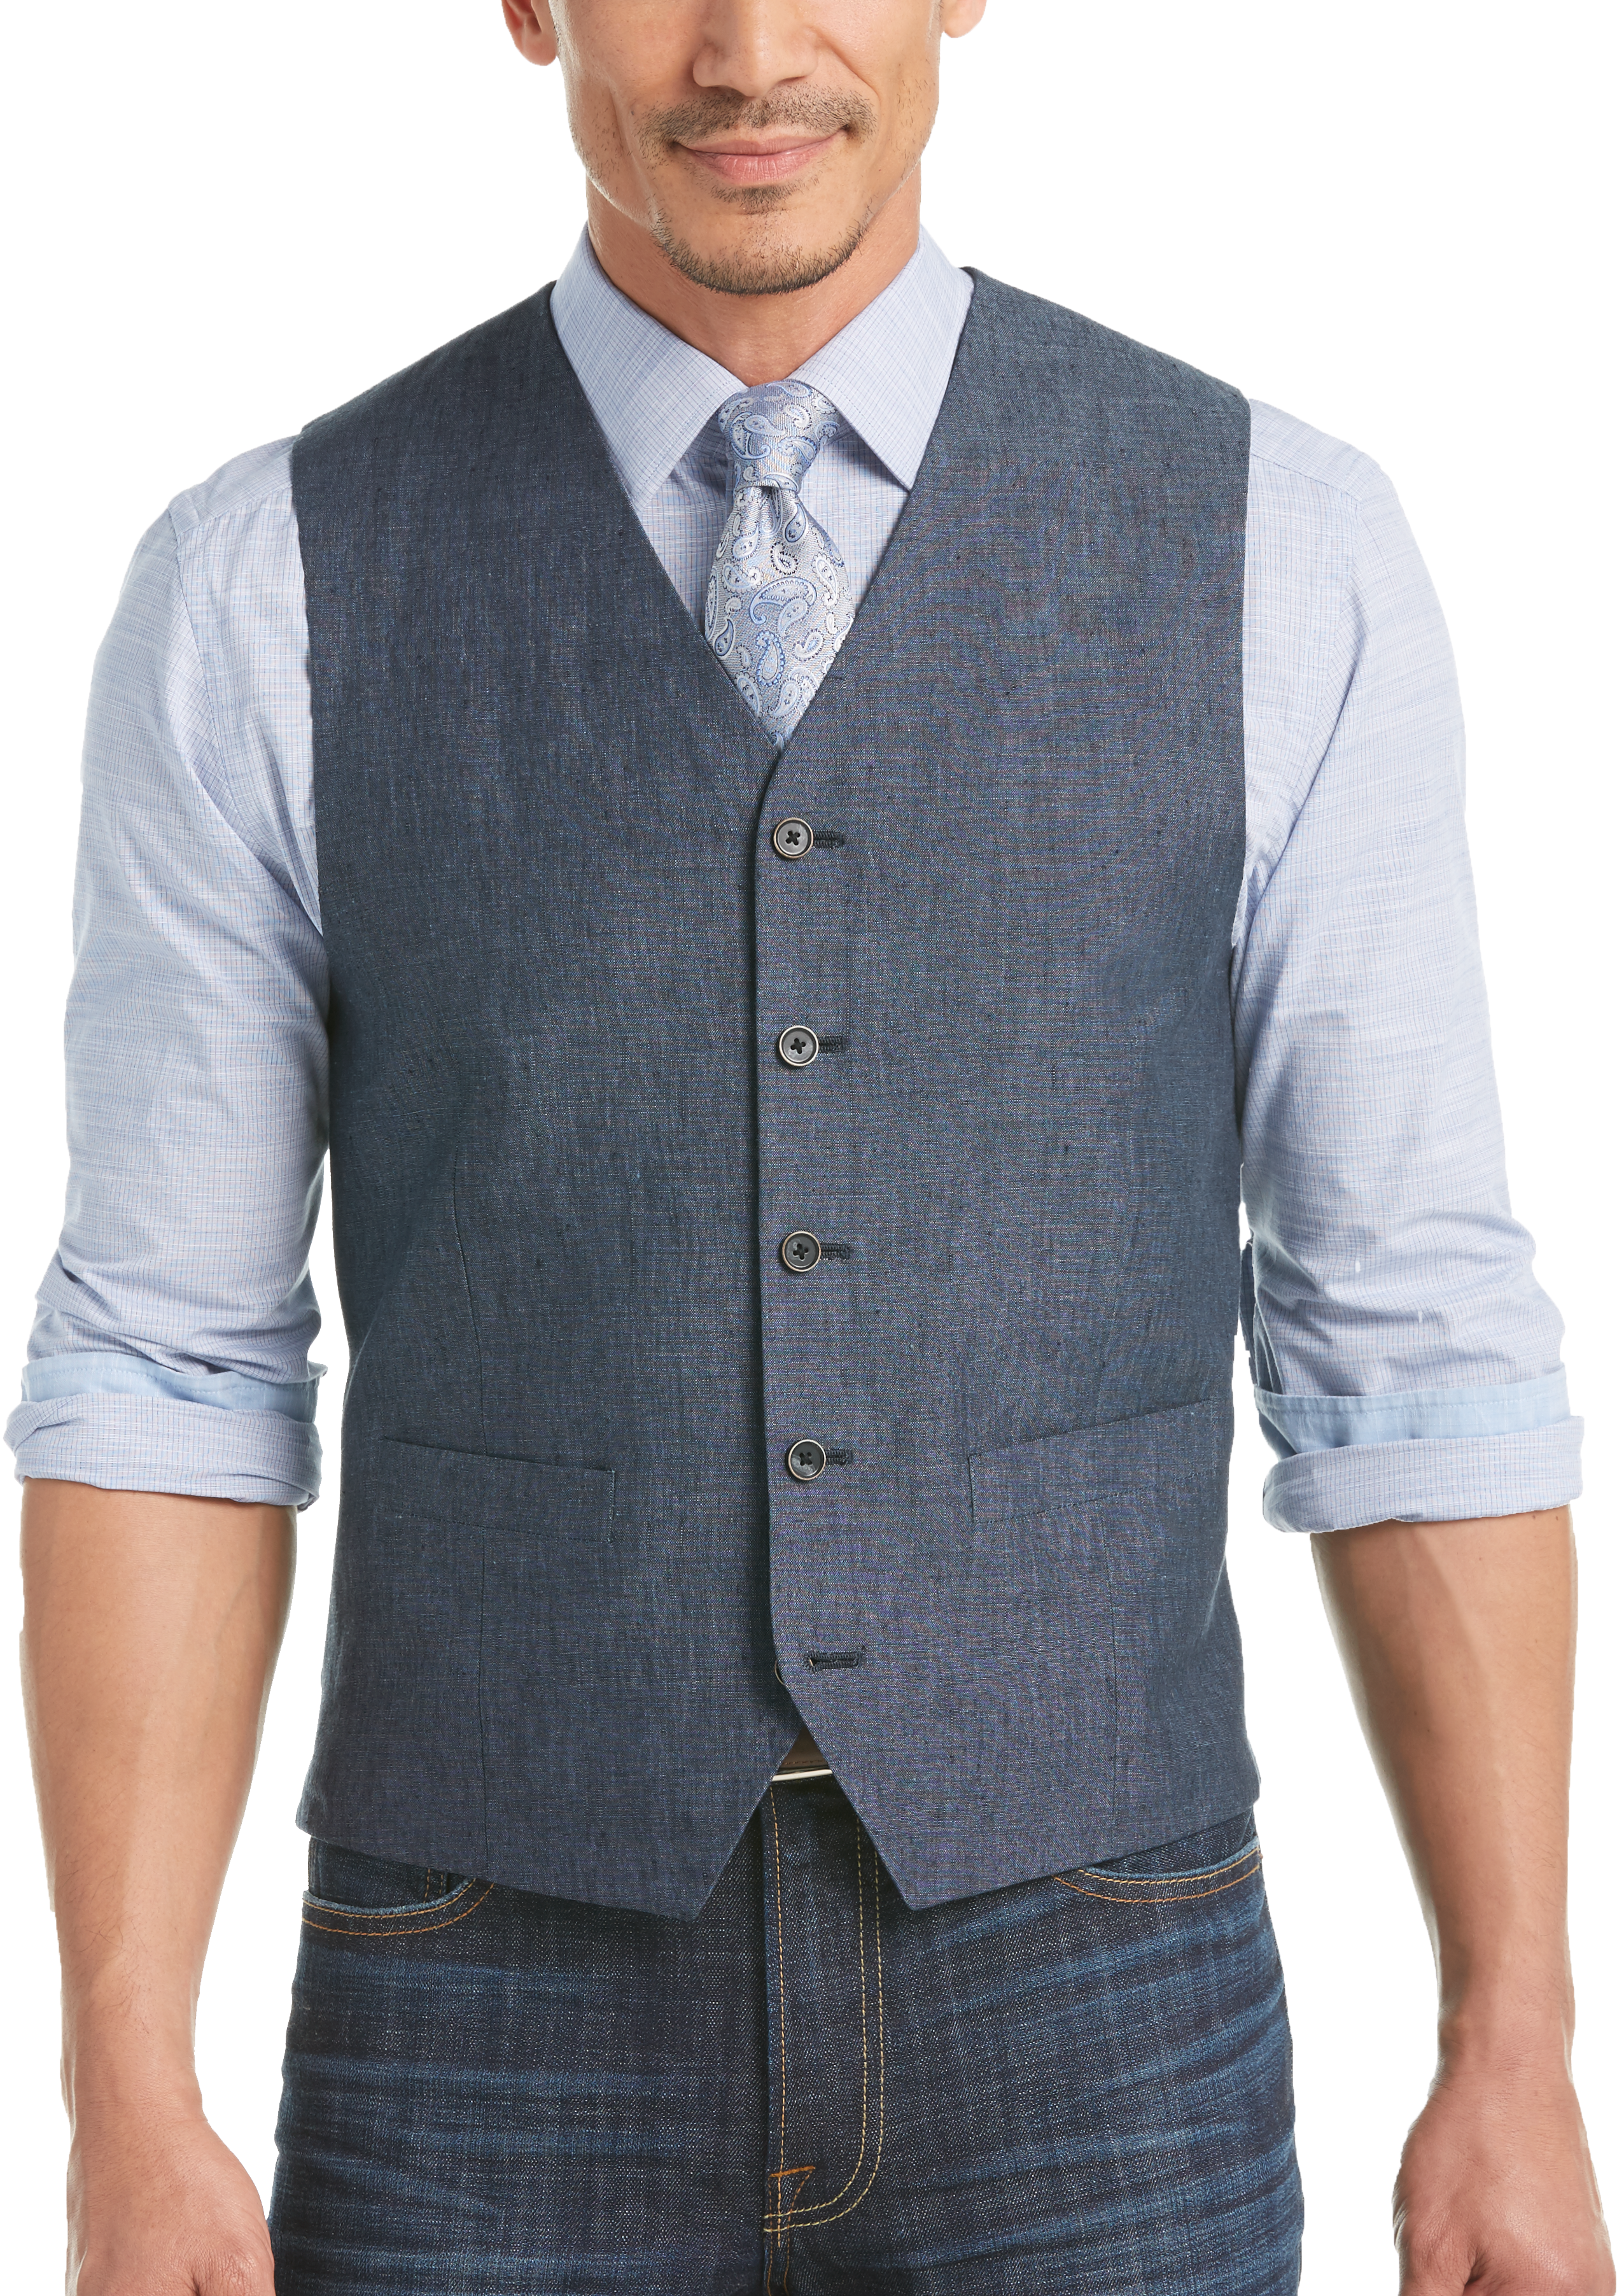 Pronto Uomo Blue Classic Fit Formal Vest with Euro Tie - Formal Ties ...